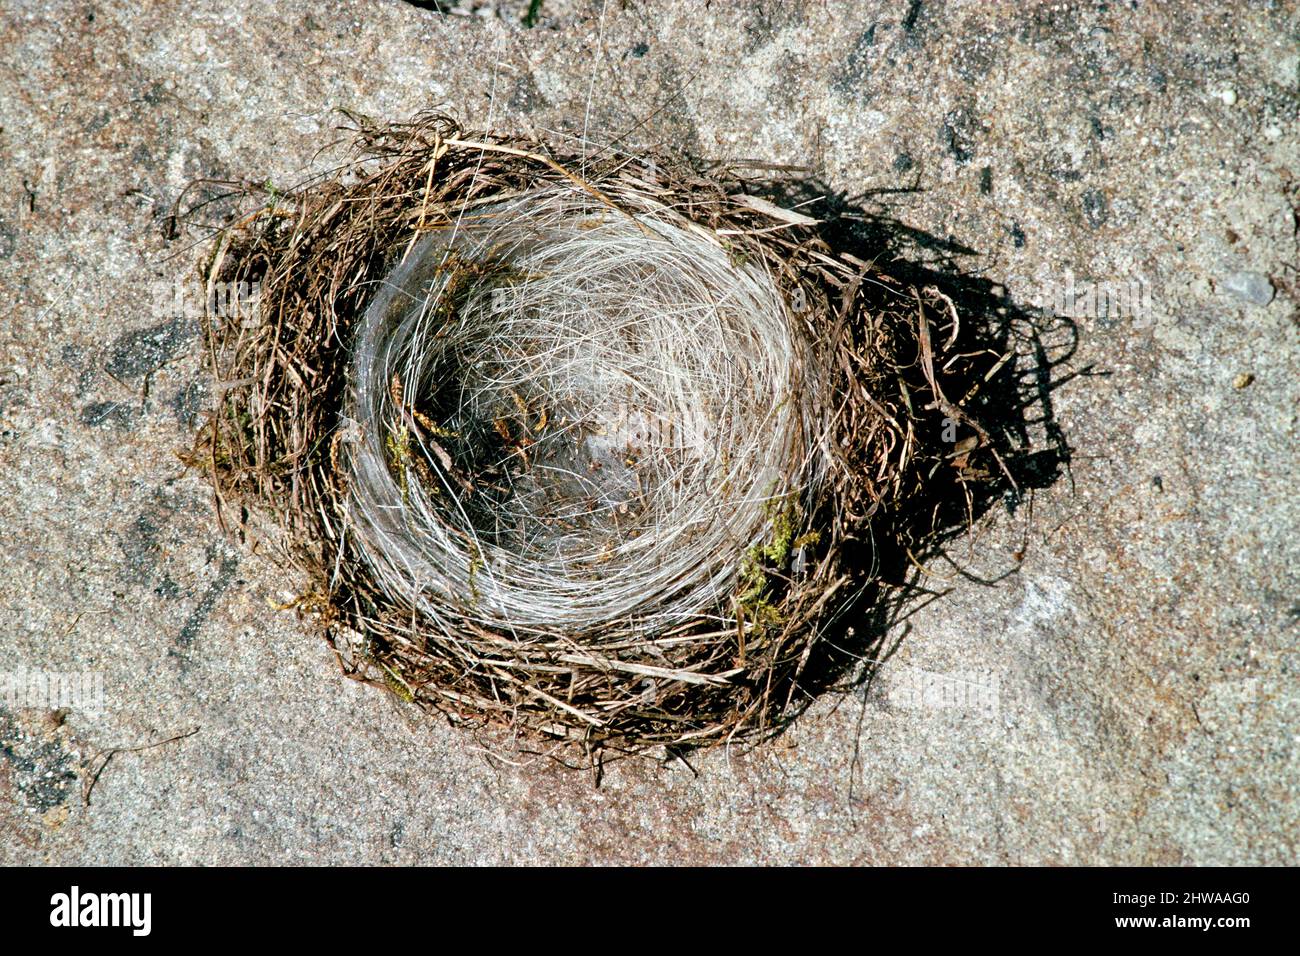 grey wagtail (Motacilla cinerea), nest buildt with hairs from grazing animals, Germany Stock Photo